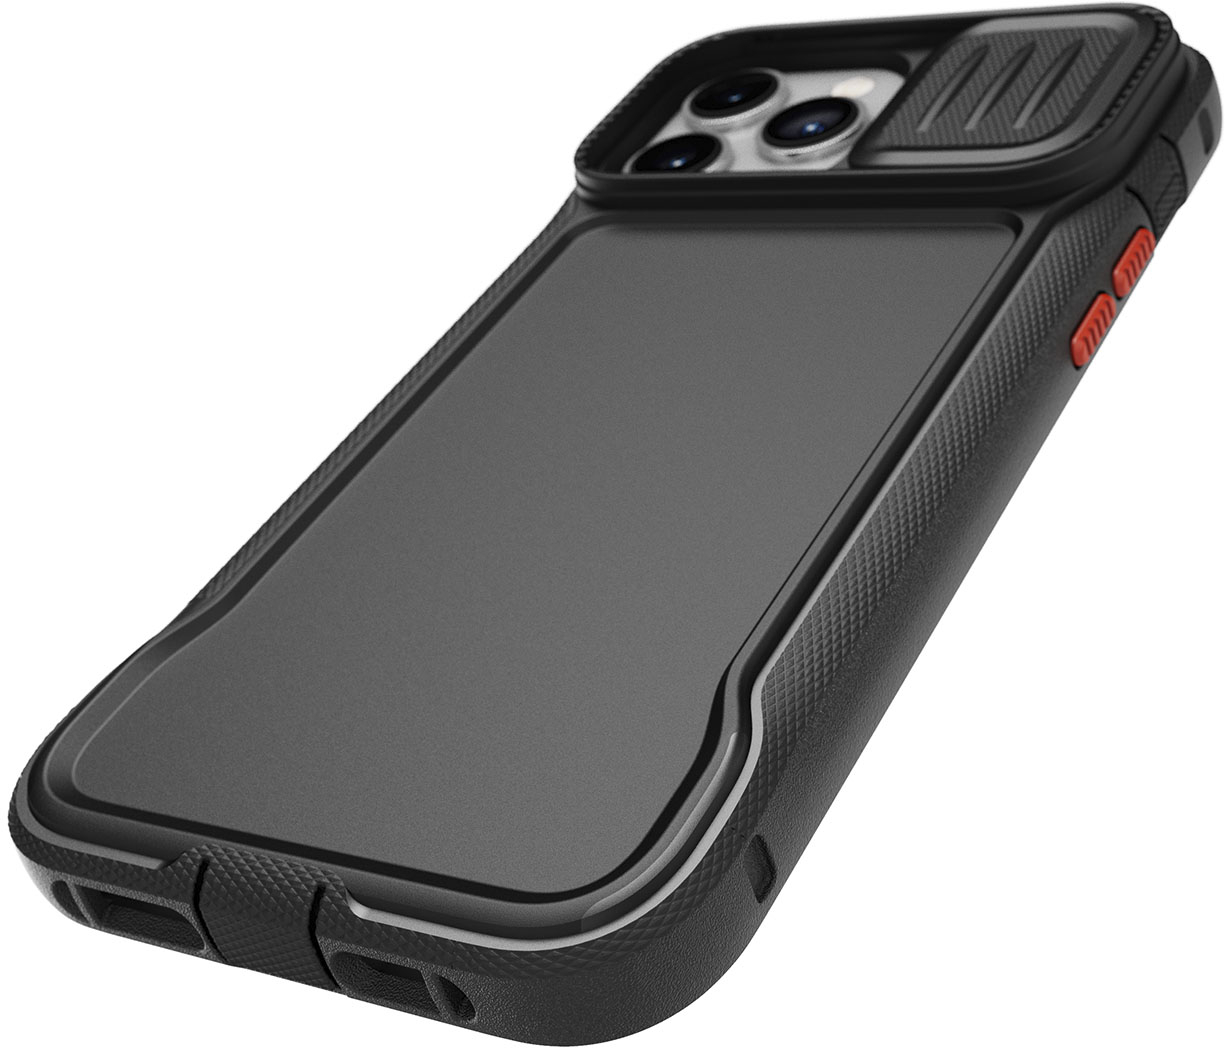 Tech21 Evomax With Holster Hard Shell Case For Apple Iphone 13 Pro Max Iphone 12 Pro Max Black bbr Best Buy